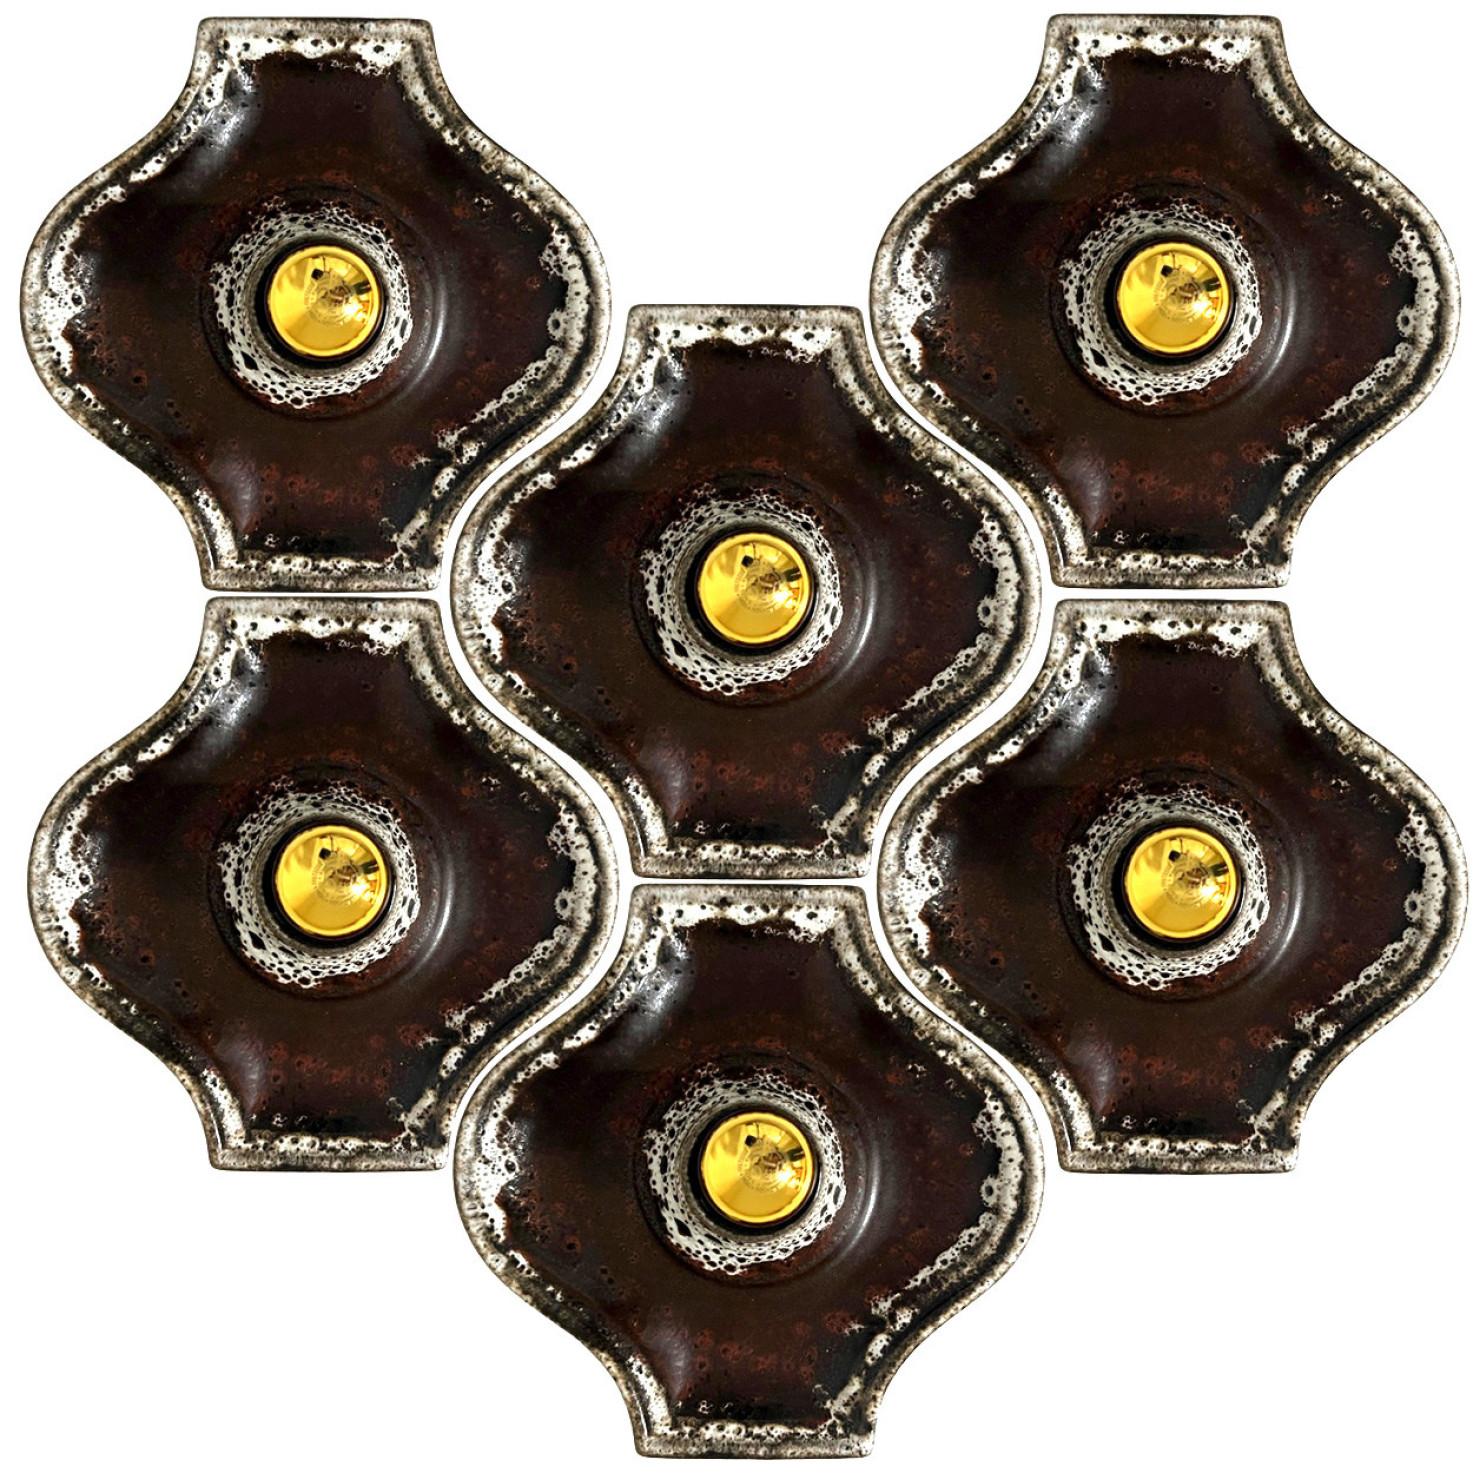 Brown ceramic wall lights in Fat Lava style. Manufactured by Hustadt Leuchten Keramik, Germany in the 1970s.

The style of the glaze is called 'Fat Lava'. Which means the glaze is thick on some parts, like lava.
A typical way to finish ceramic in